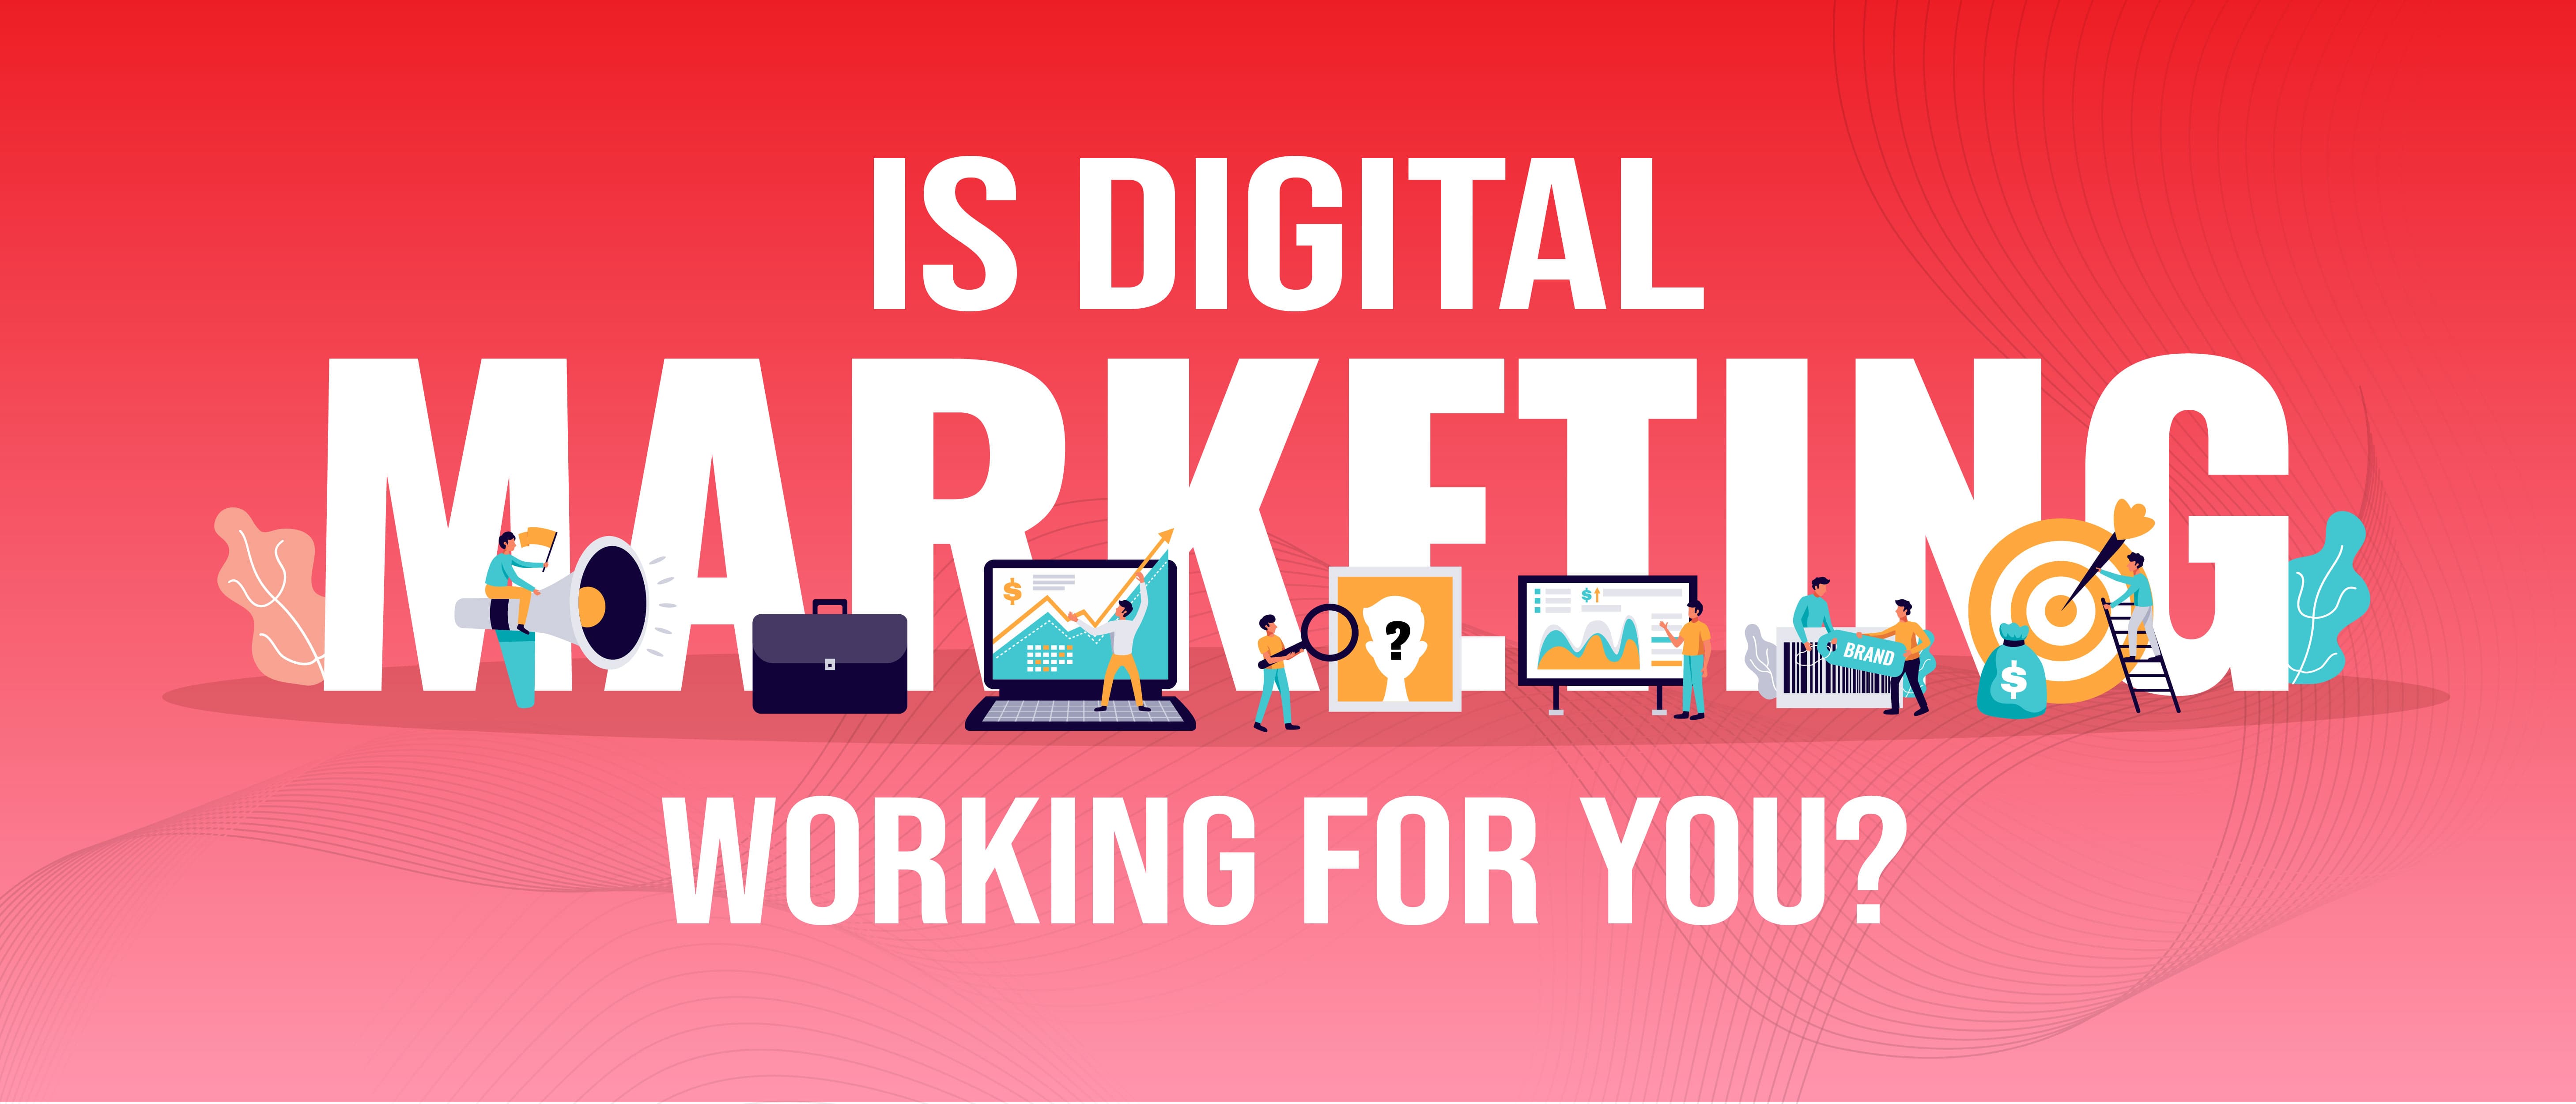 Intuisyz Digital Marketing Consulting India | IT Consultant Services